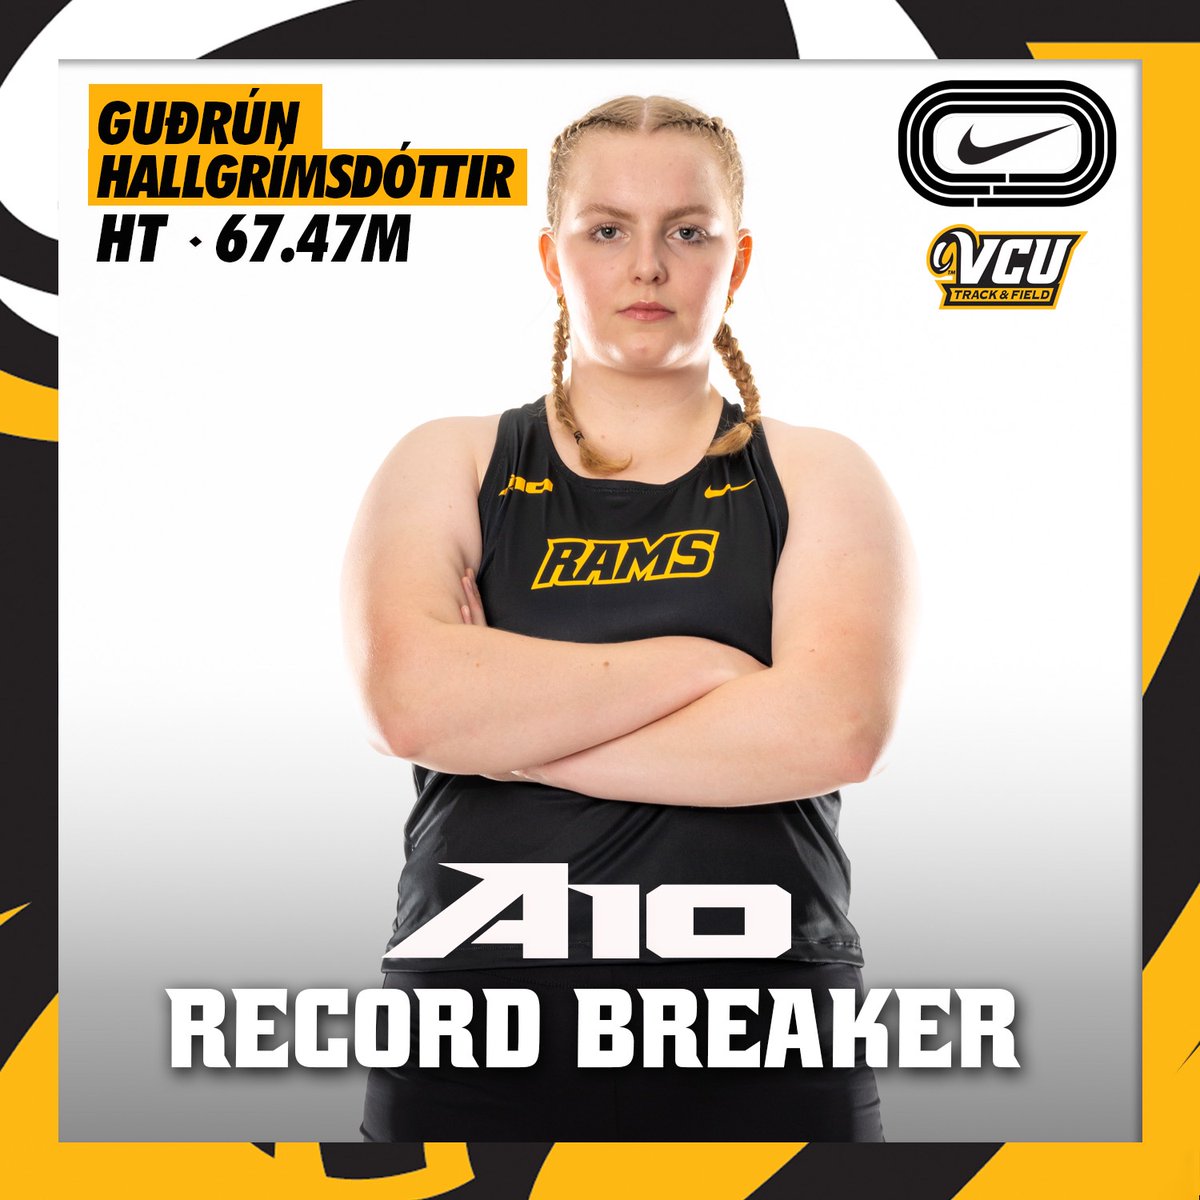 Another day, another record. Gudrun demolishes a 15-year-old @atlantic10 meet record by nearly six meters‼️

She wins the hammer for the third straight year!

#LetsGoVCU